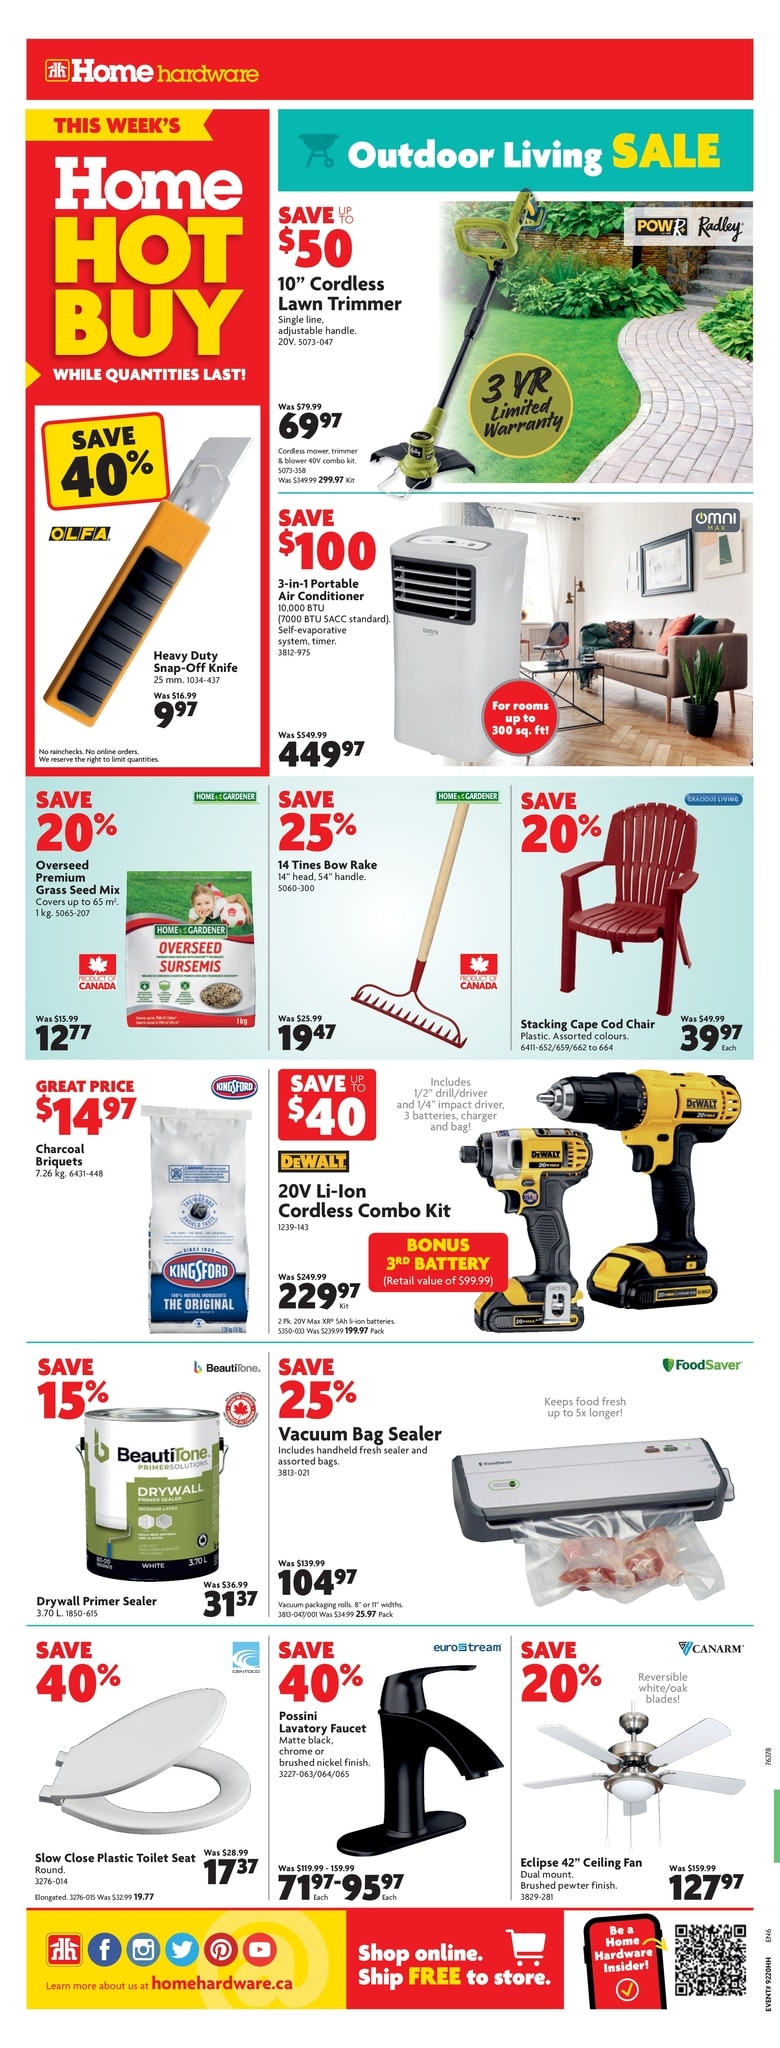 Home Hardware - Weekly Flyer Specials - Page 2